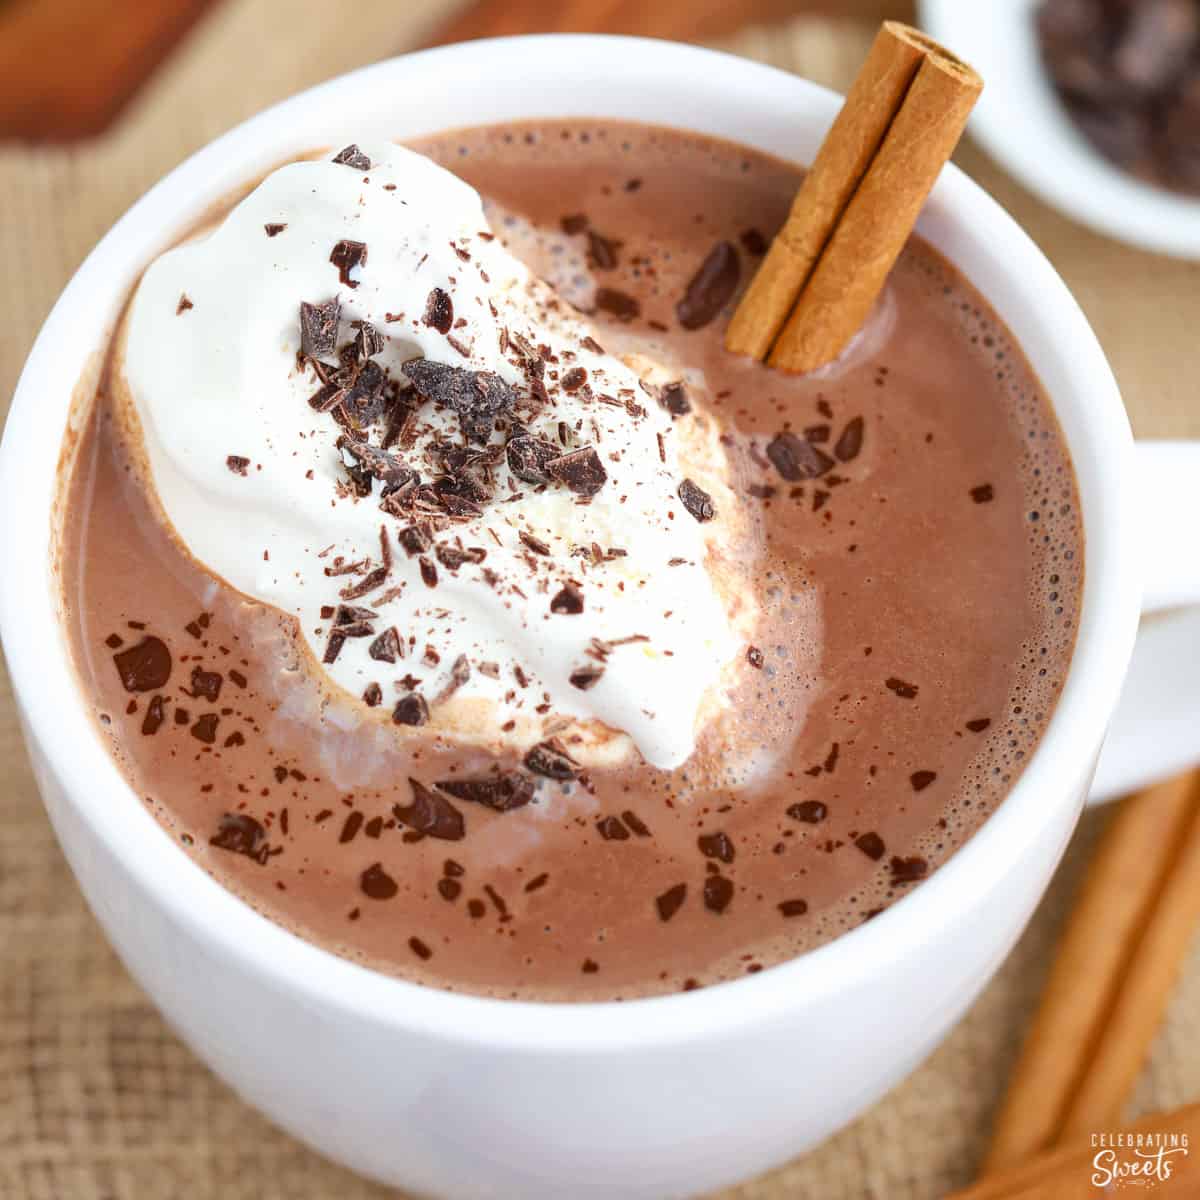 https://celebratingsweets.com/wp-content/uploads/2020/01/Mexican-Hot-Chocolate-sq-1.jpg